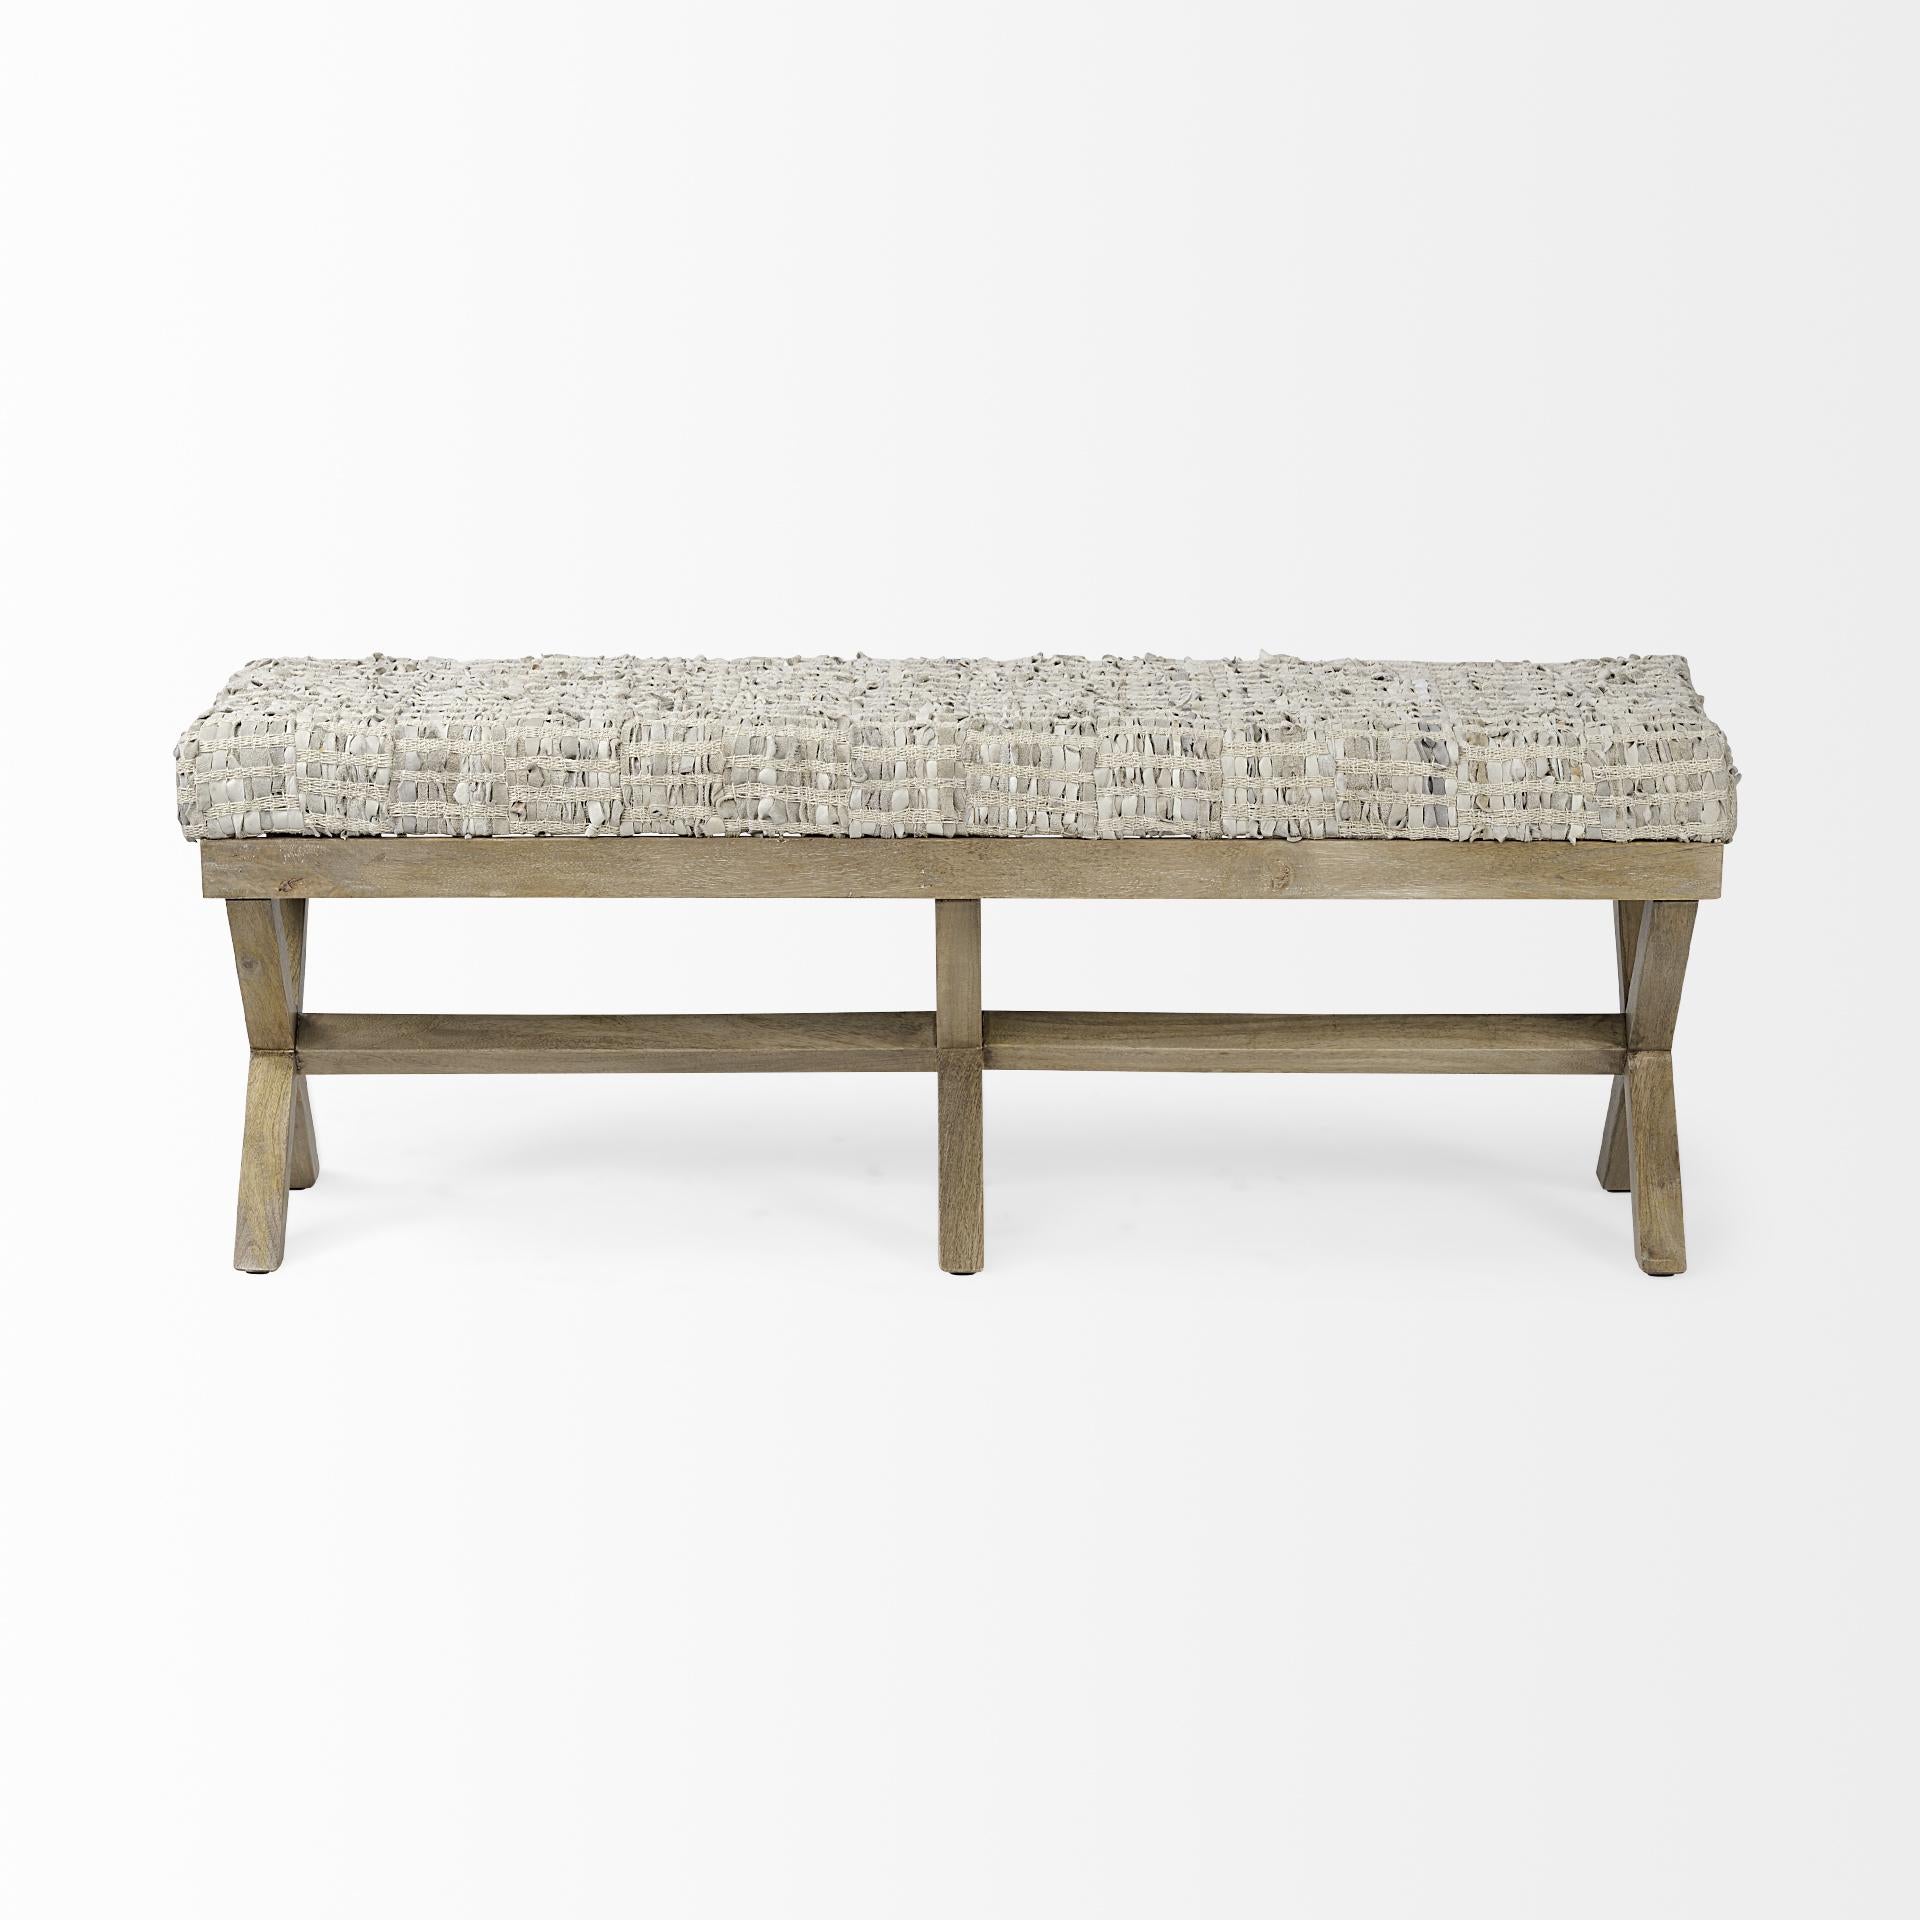 Rectangular Indian Mango Wood Light Brown Base W Beige-Toned Woven Leather Cushion Accent Bench